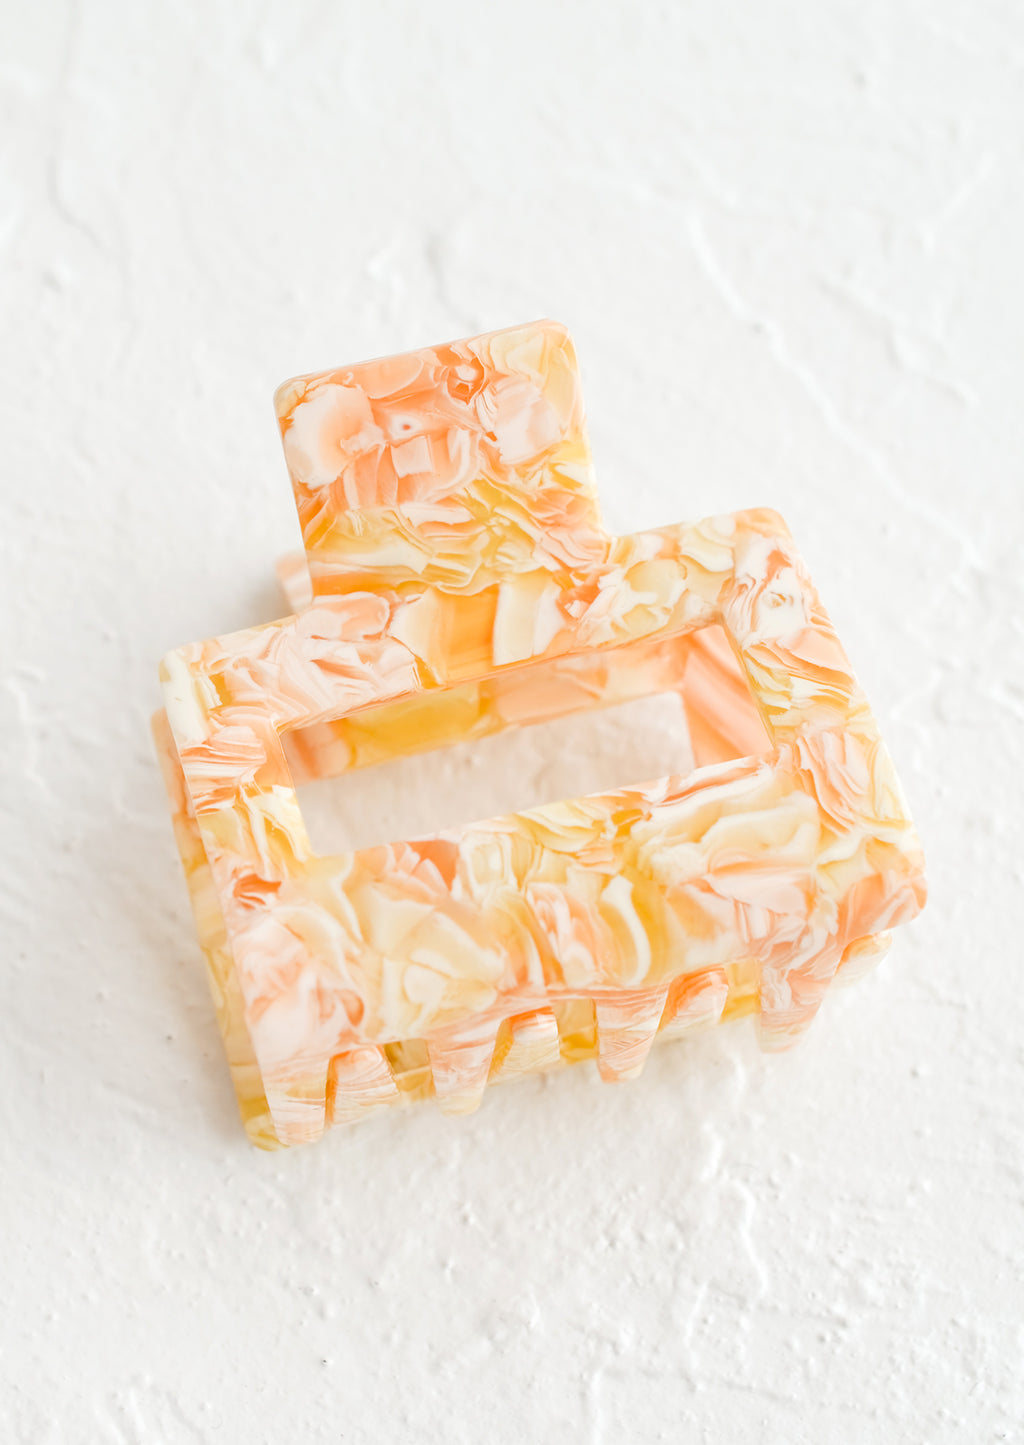 Citrus Marble: A marbled hair clip in orange marble.